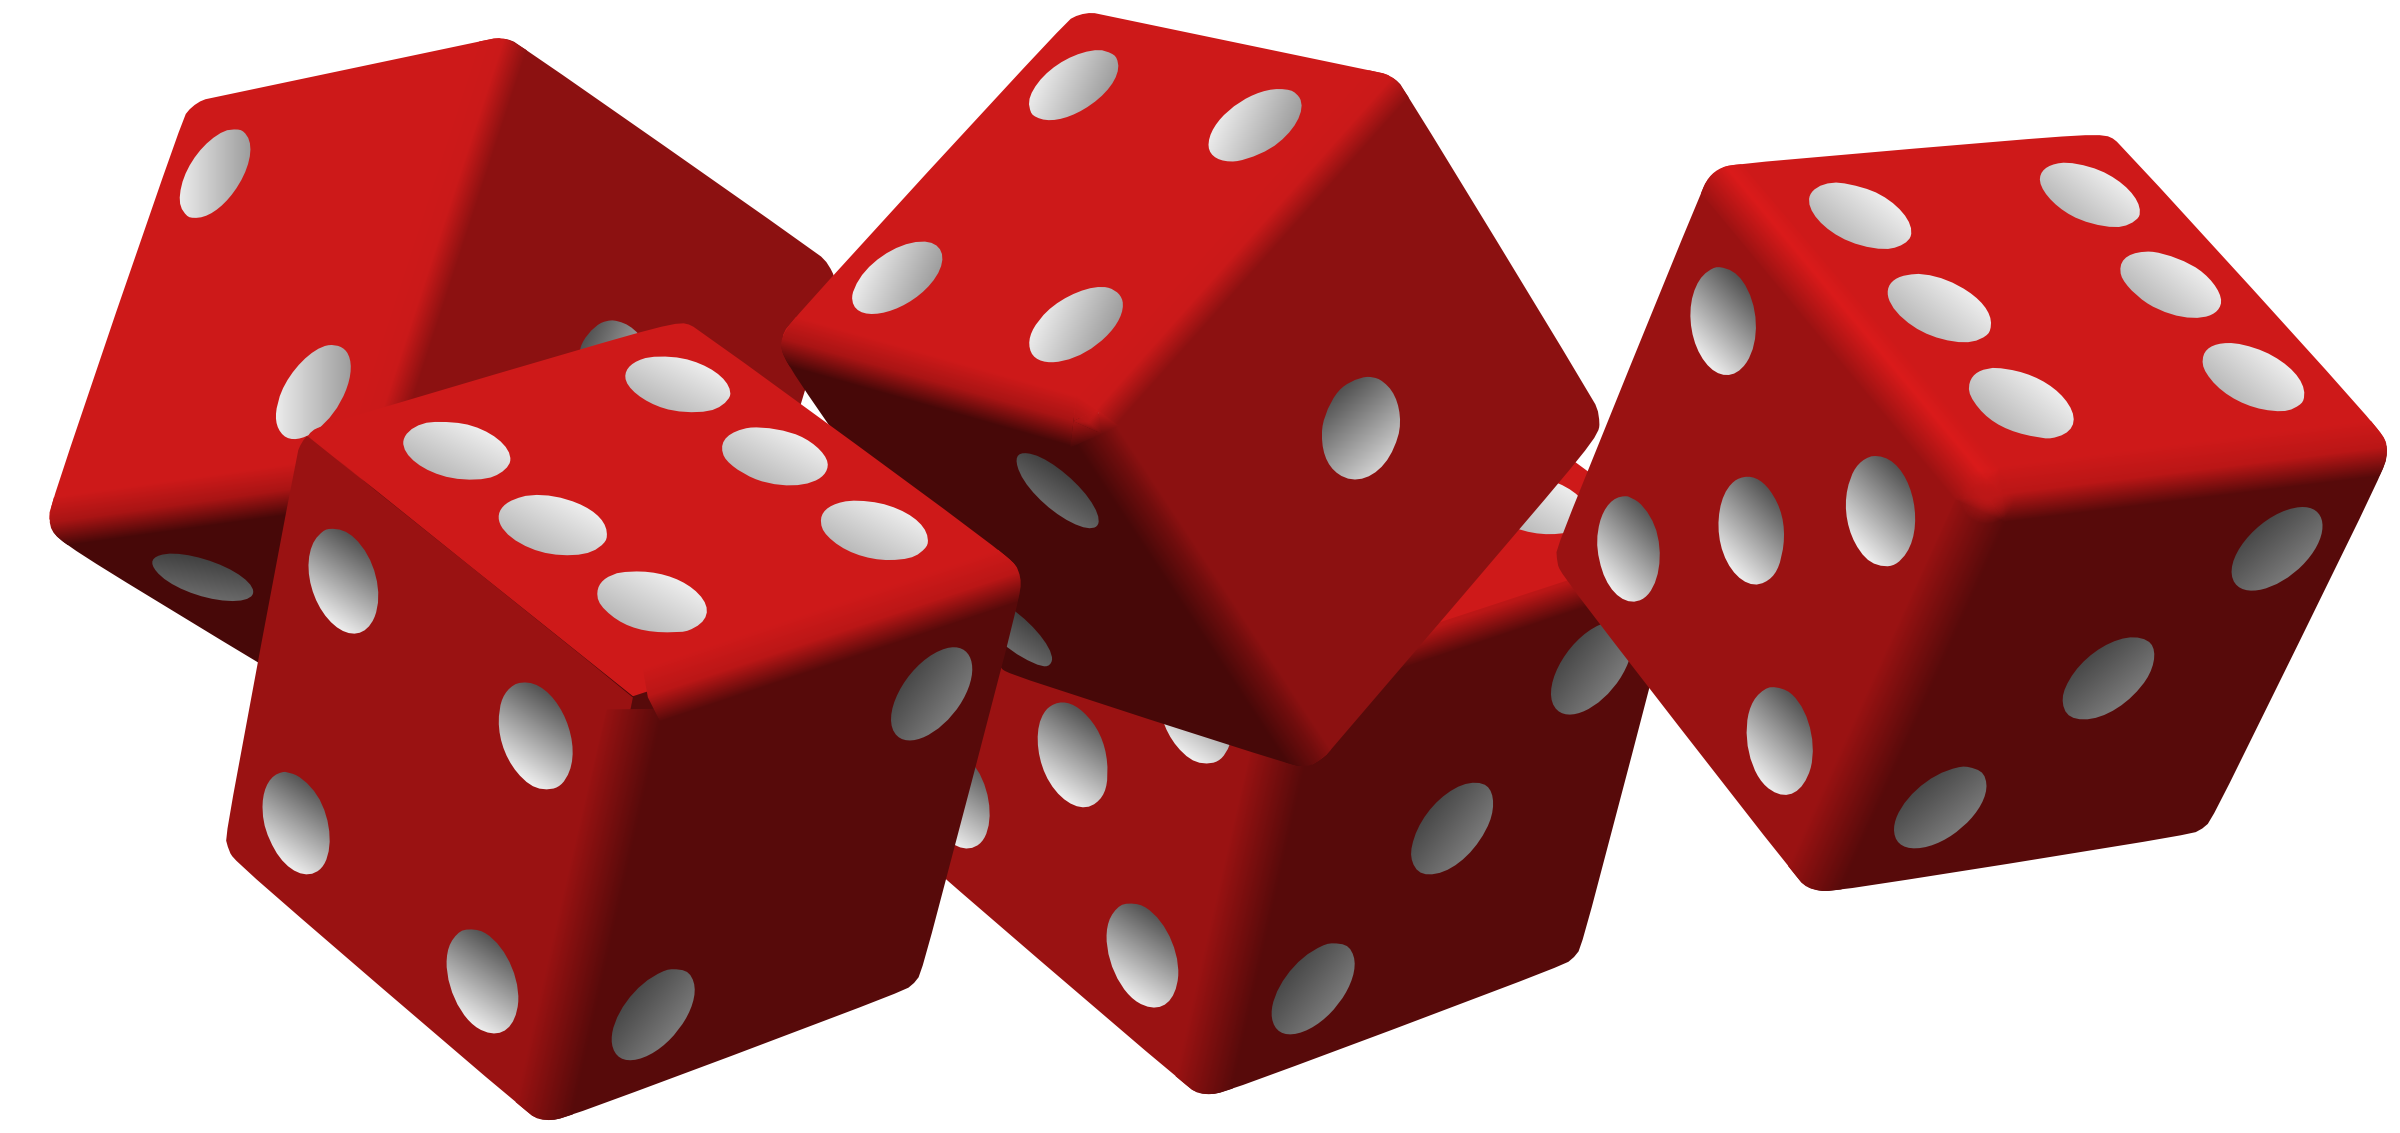 Casino Dice Png 1 dice clipart clipart panda free clipart images #41782